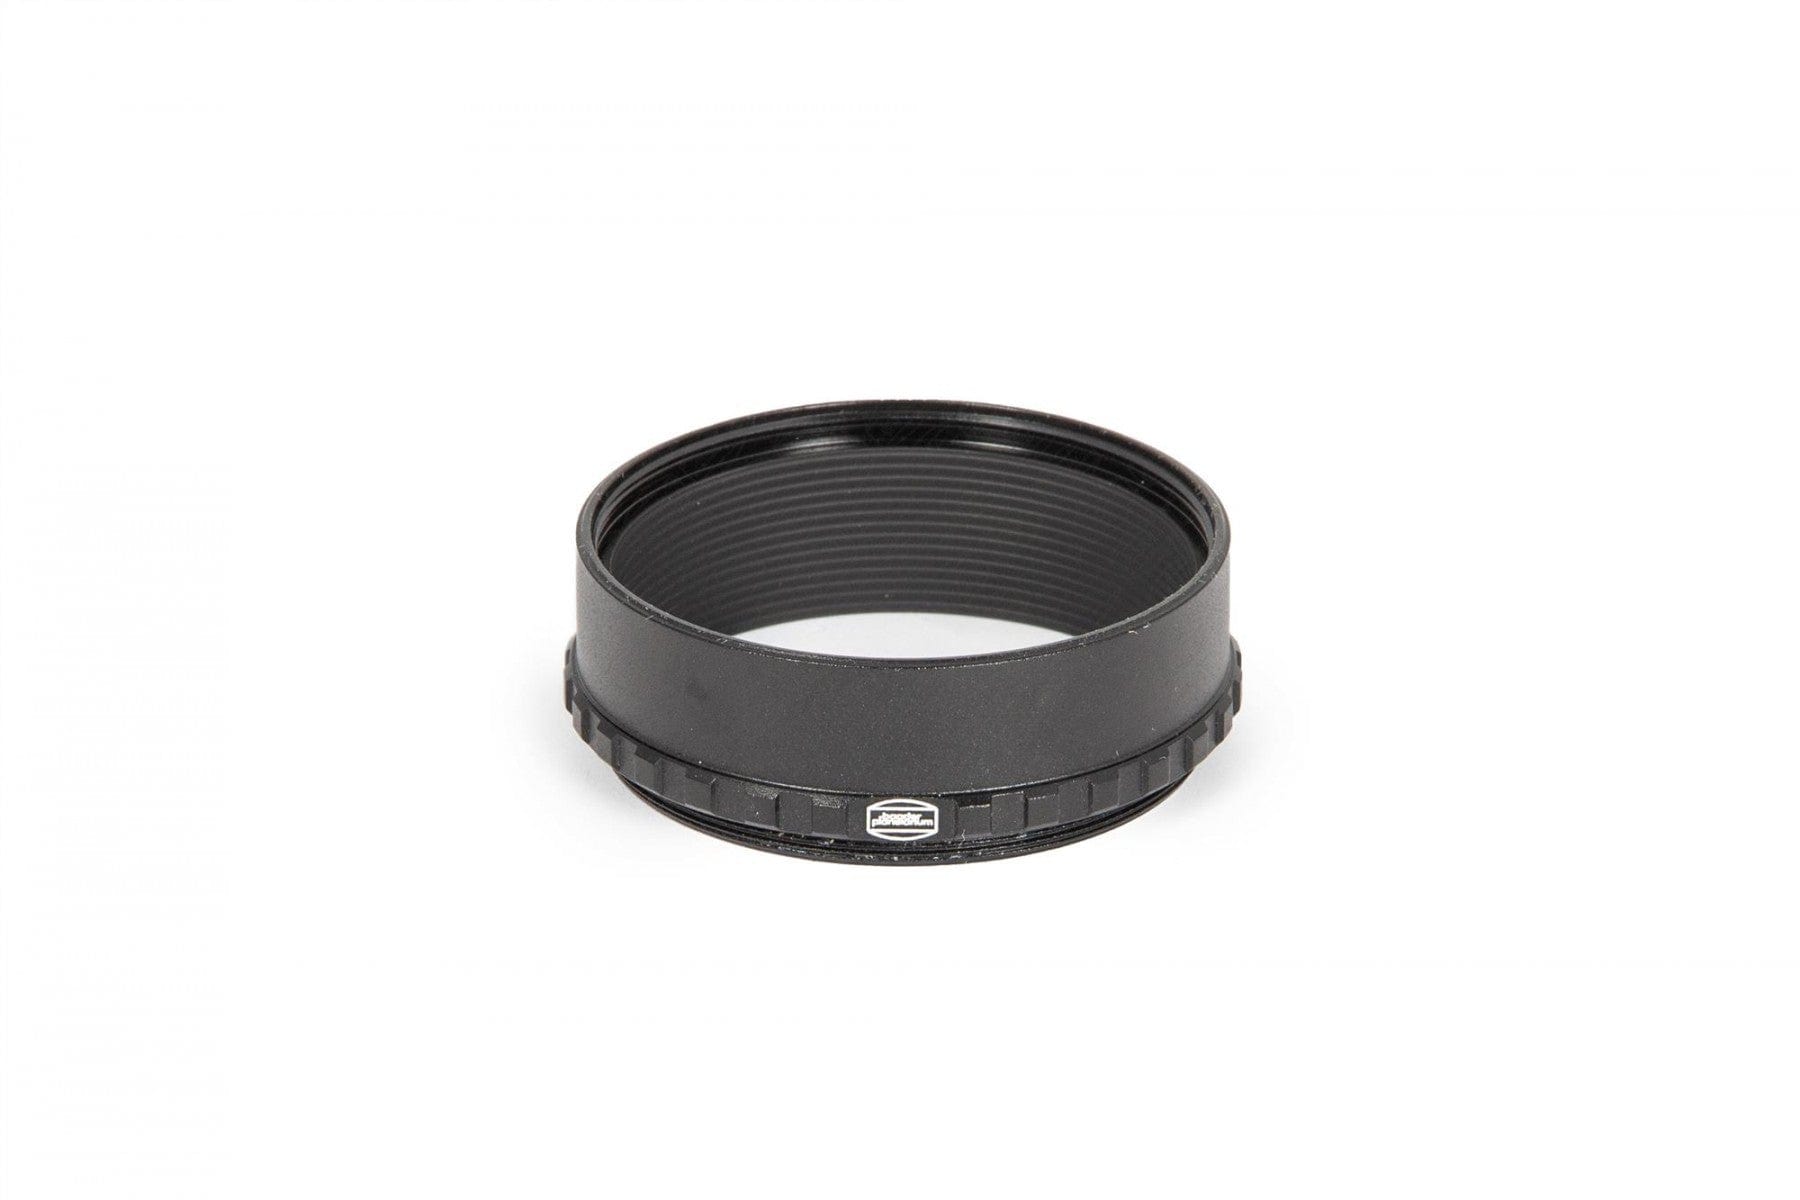 Baader Planetarium Accessory Baader M48 Extension Tube 30 mm   / 2" nose piece with Safety Kerfs